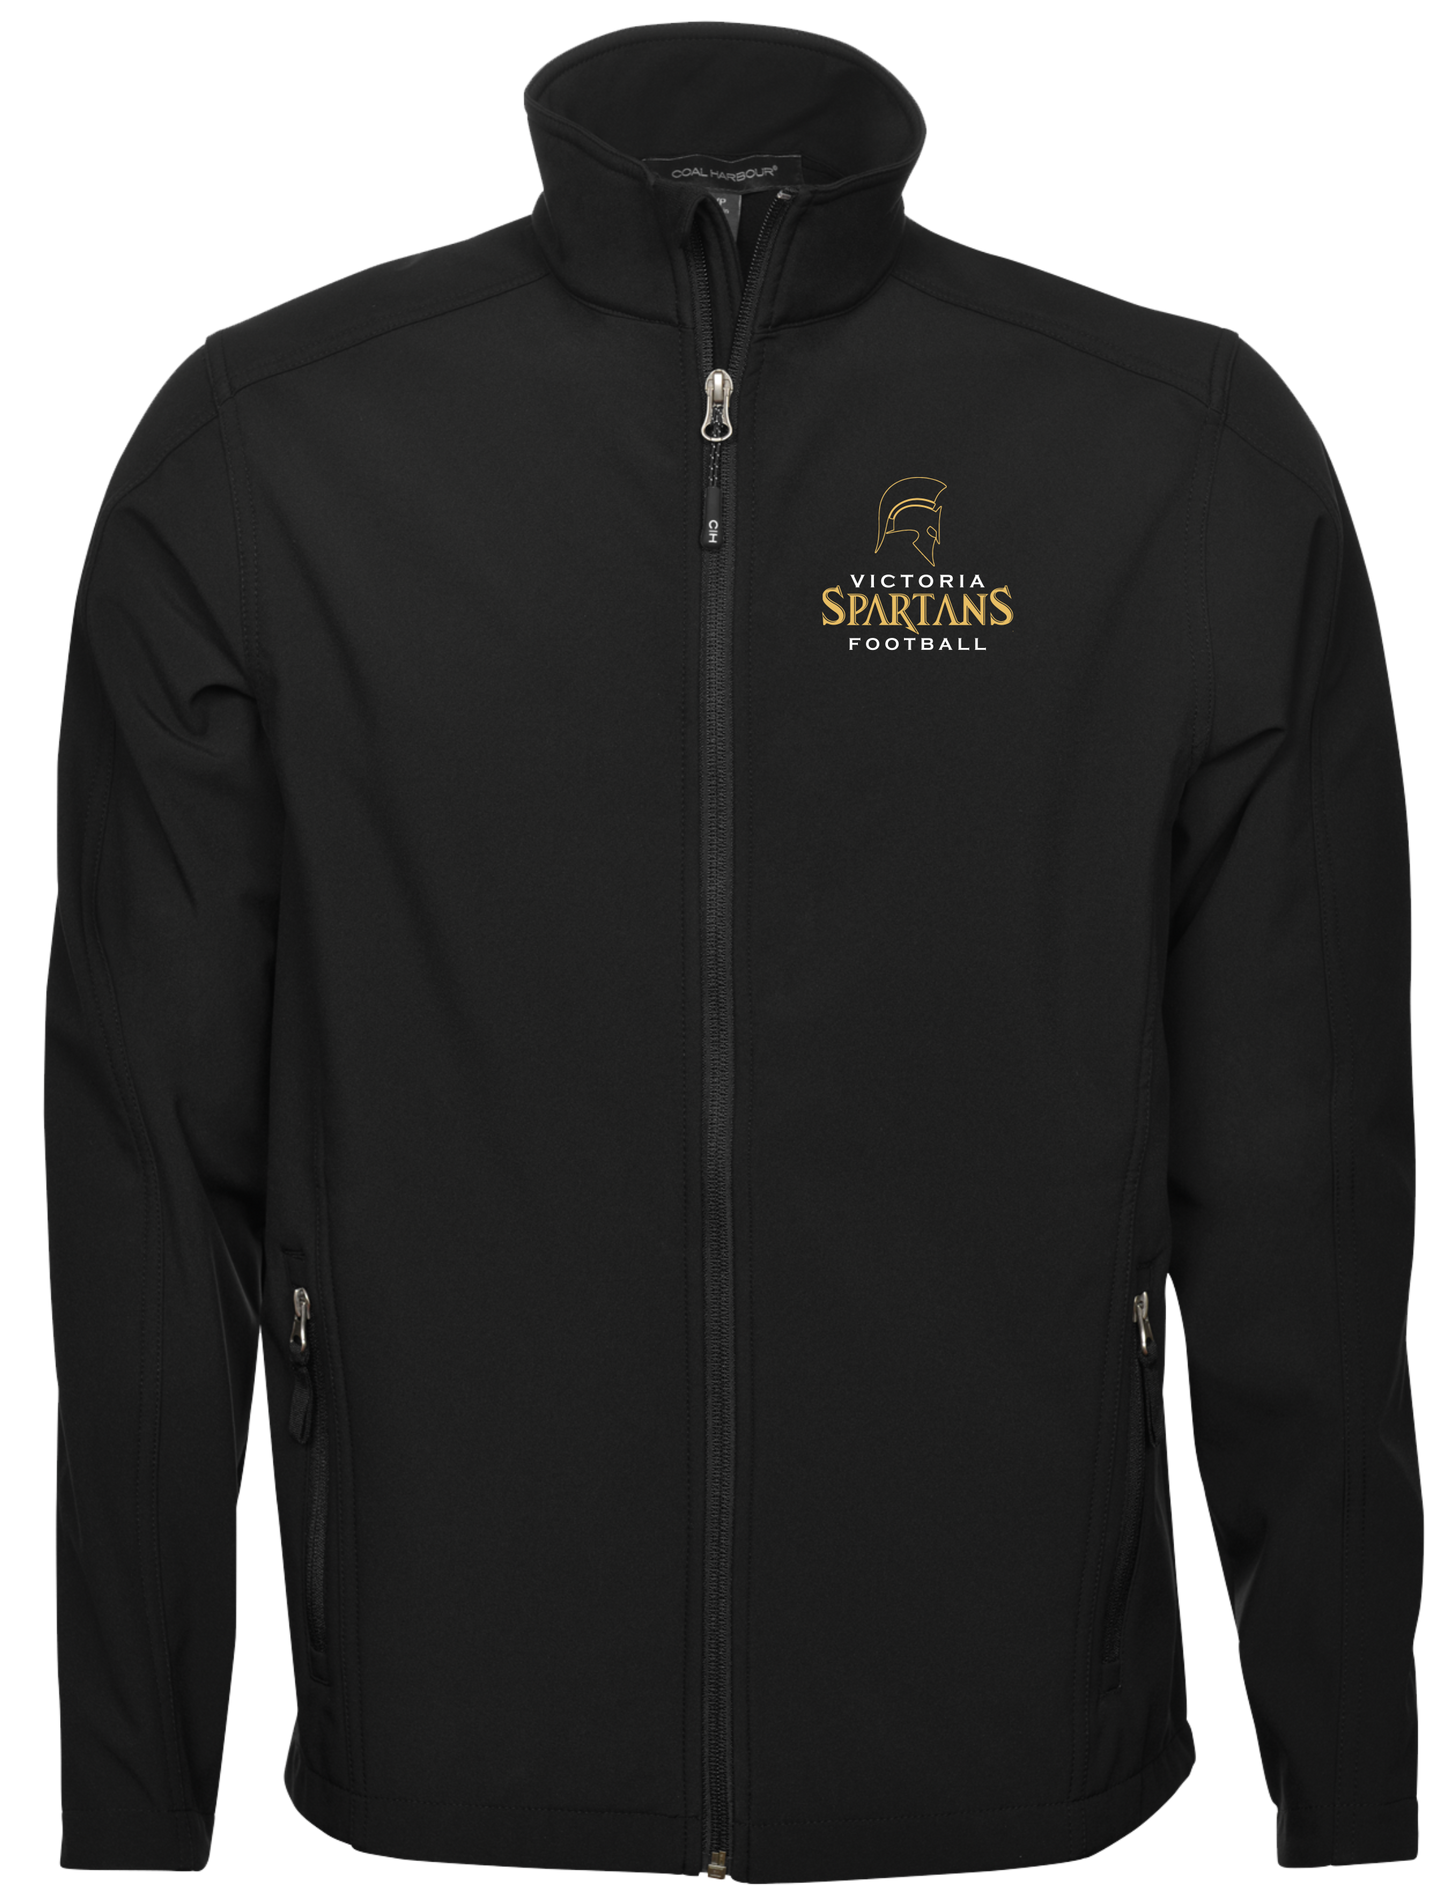 Victoria Spartans Football Men's and Women's Softshell Jacket